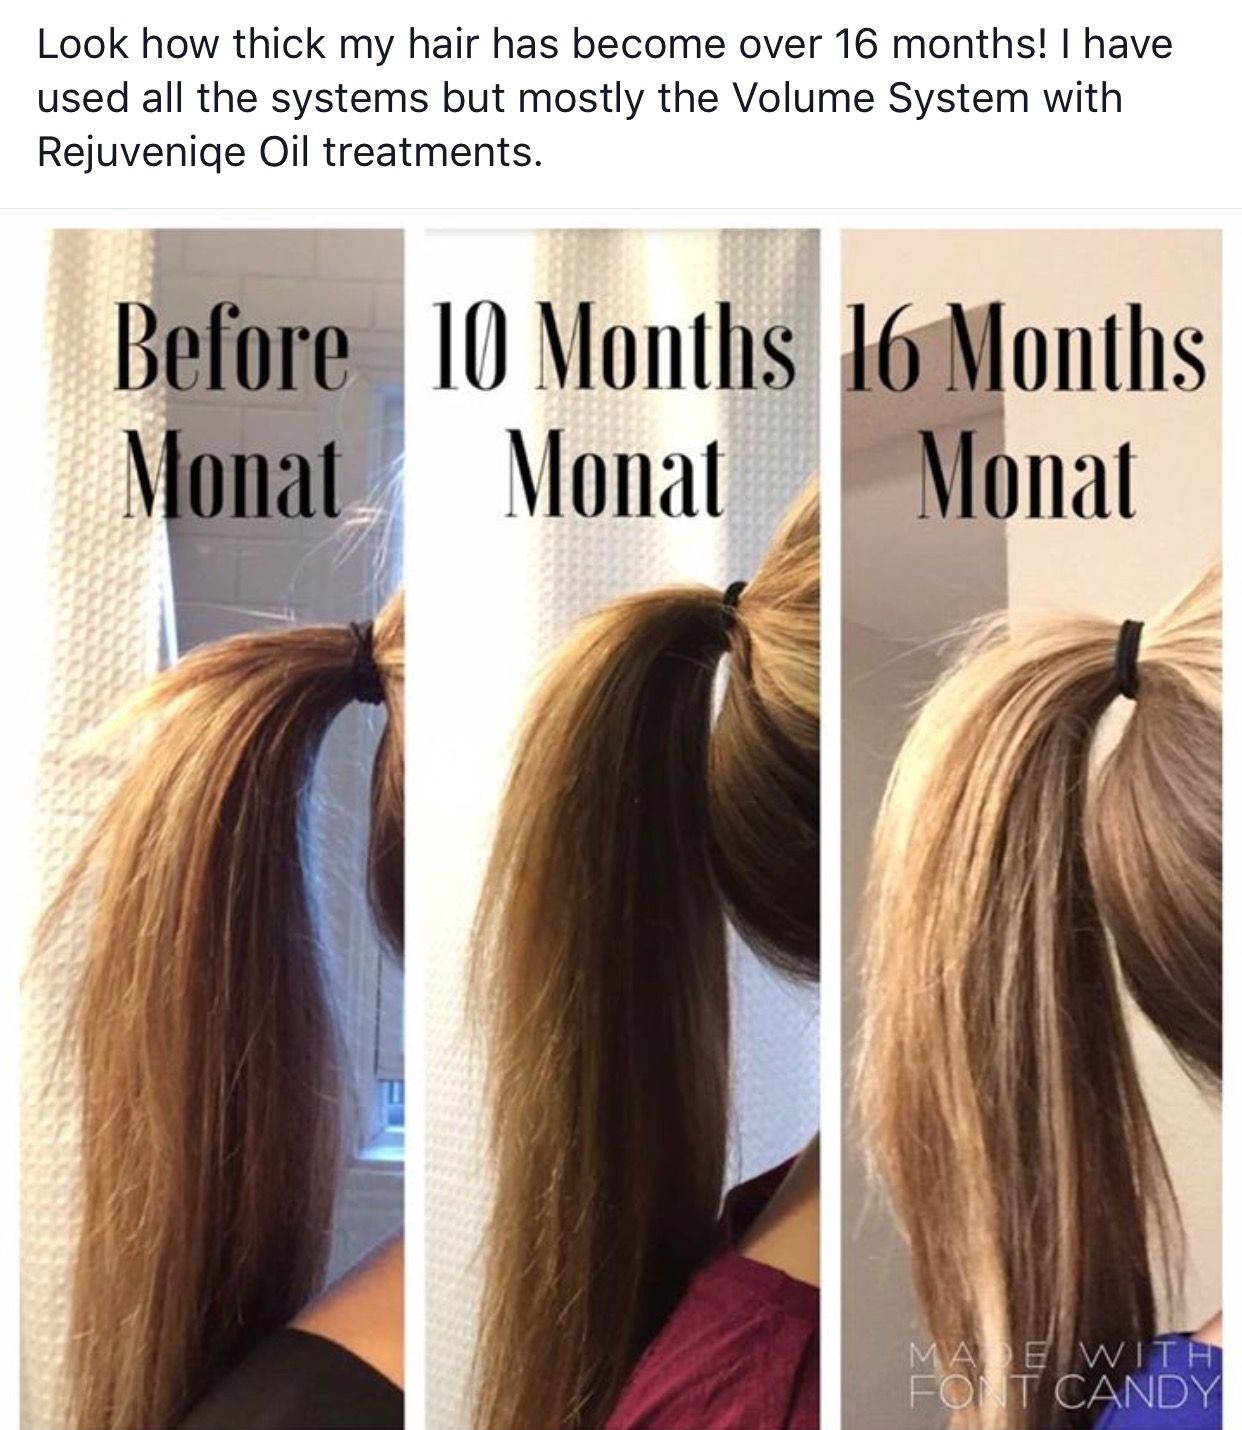 Want thicker hair??? Monat is amazing. All natural and ...